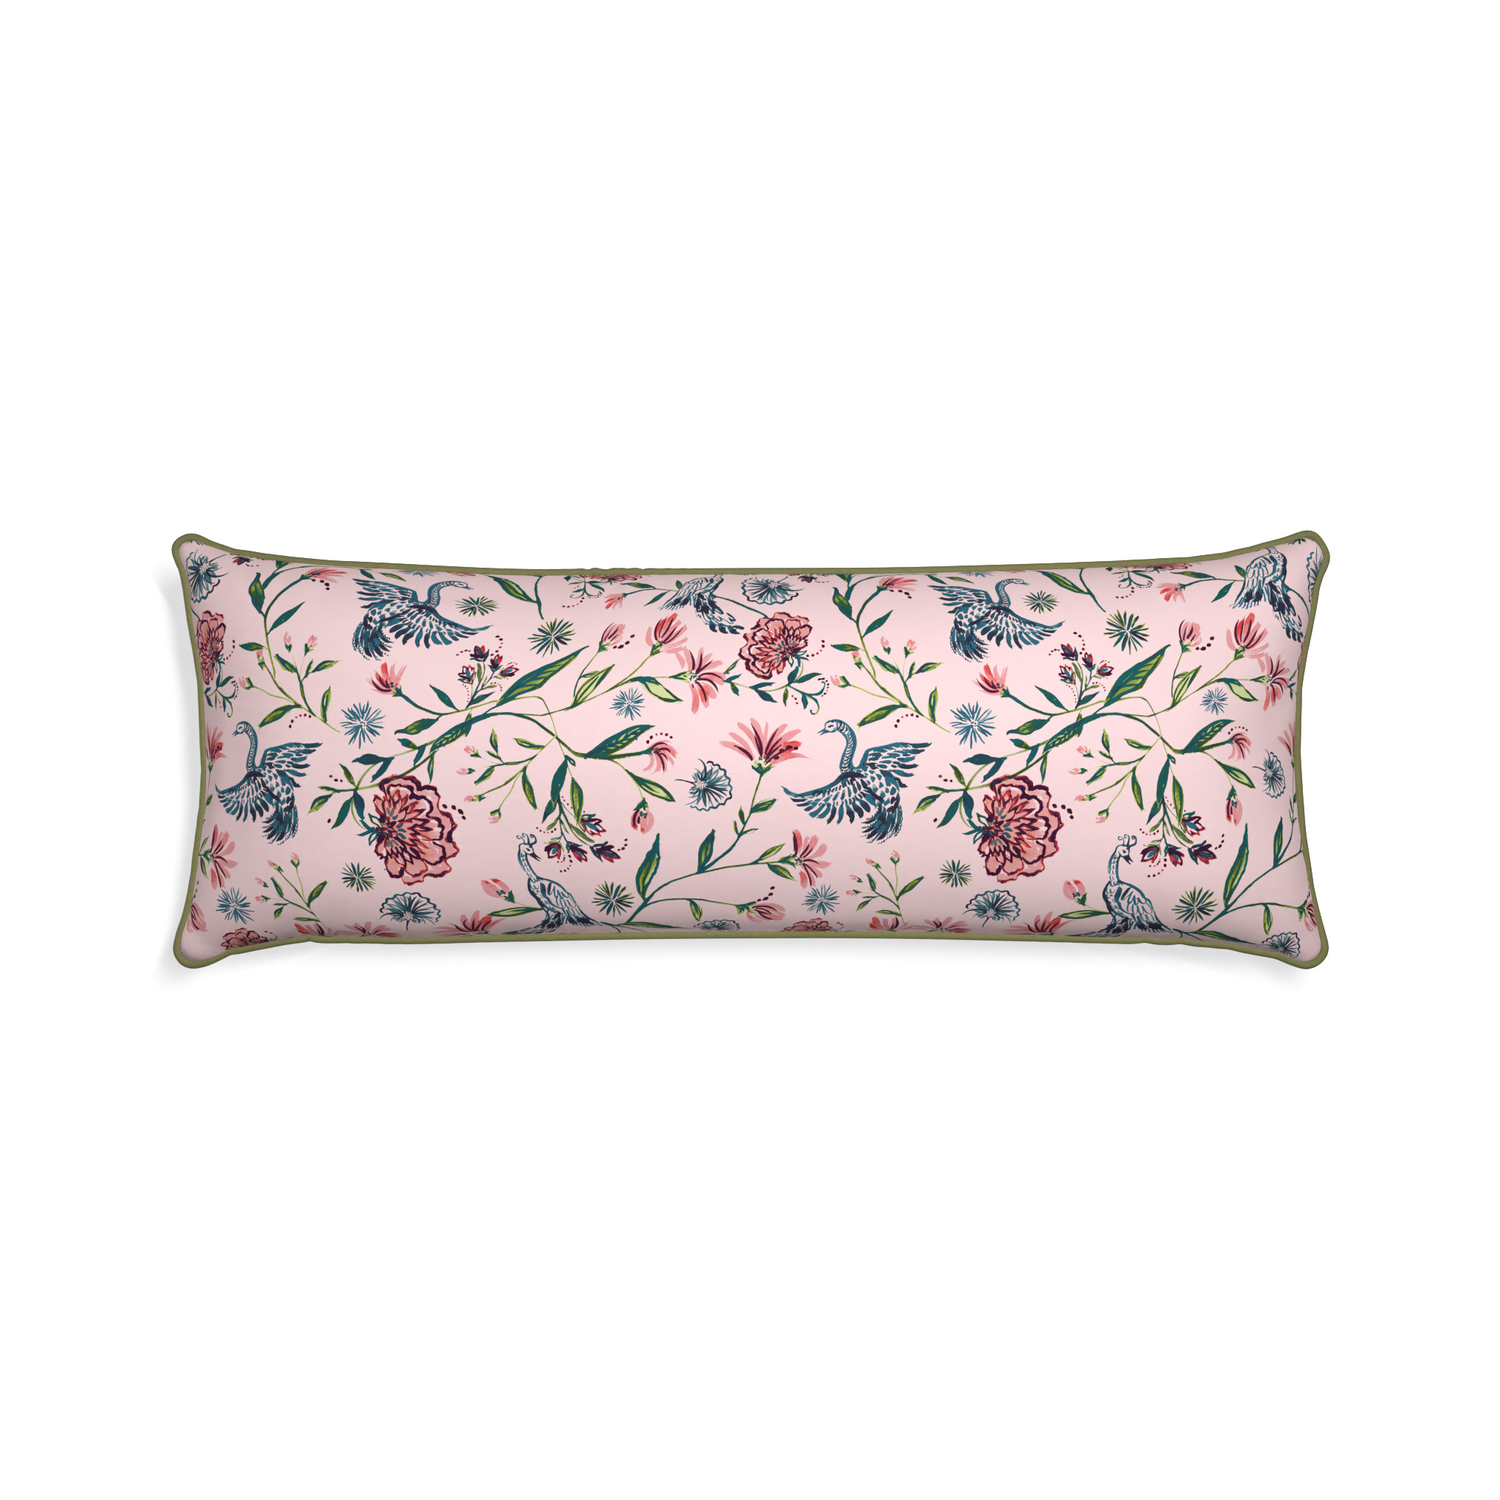 Xl-lumbar daphne rose custom pillow with moss piping on white background